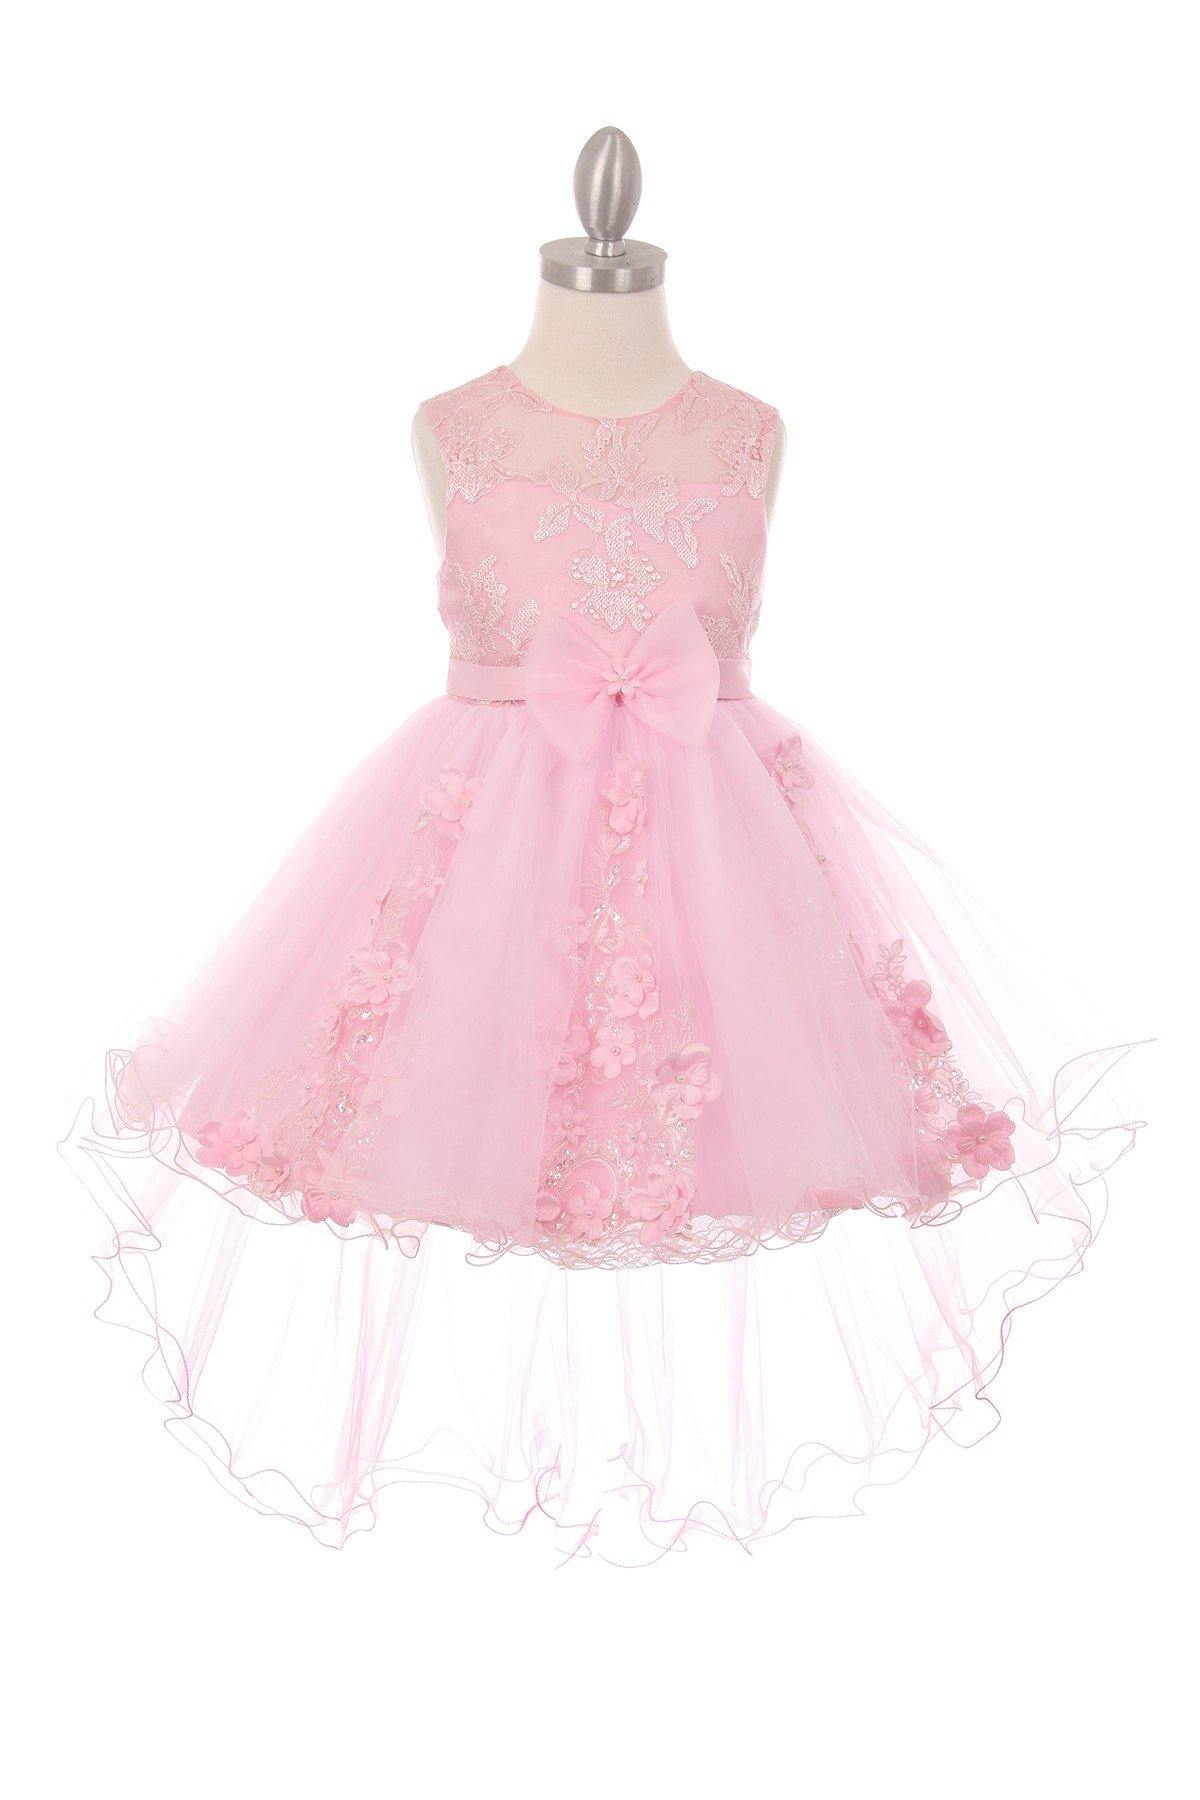 Short Beaded Party Dress Flower Girls Dress - The Dress Outlet Cinderella Couture